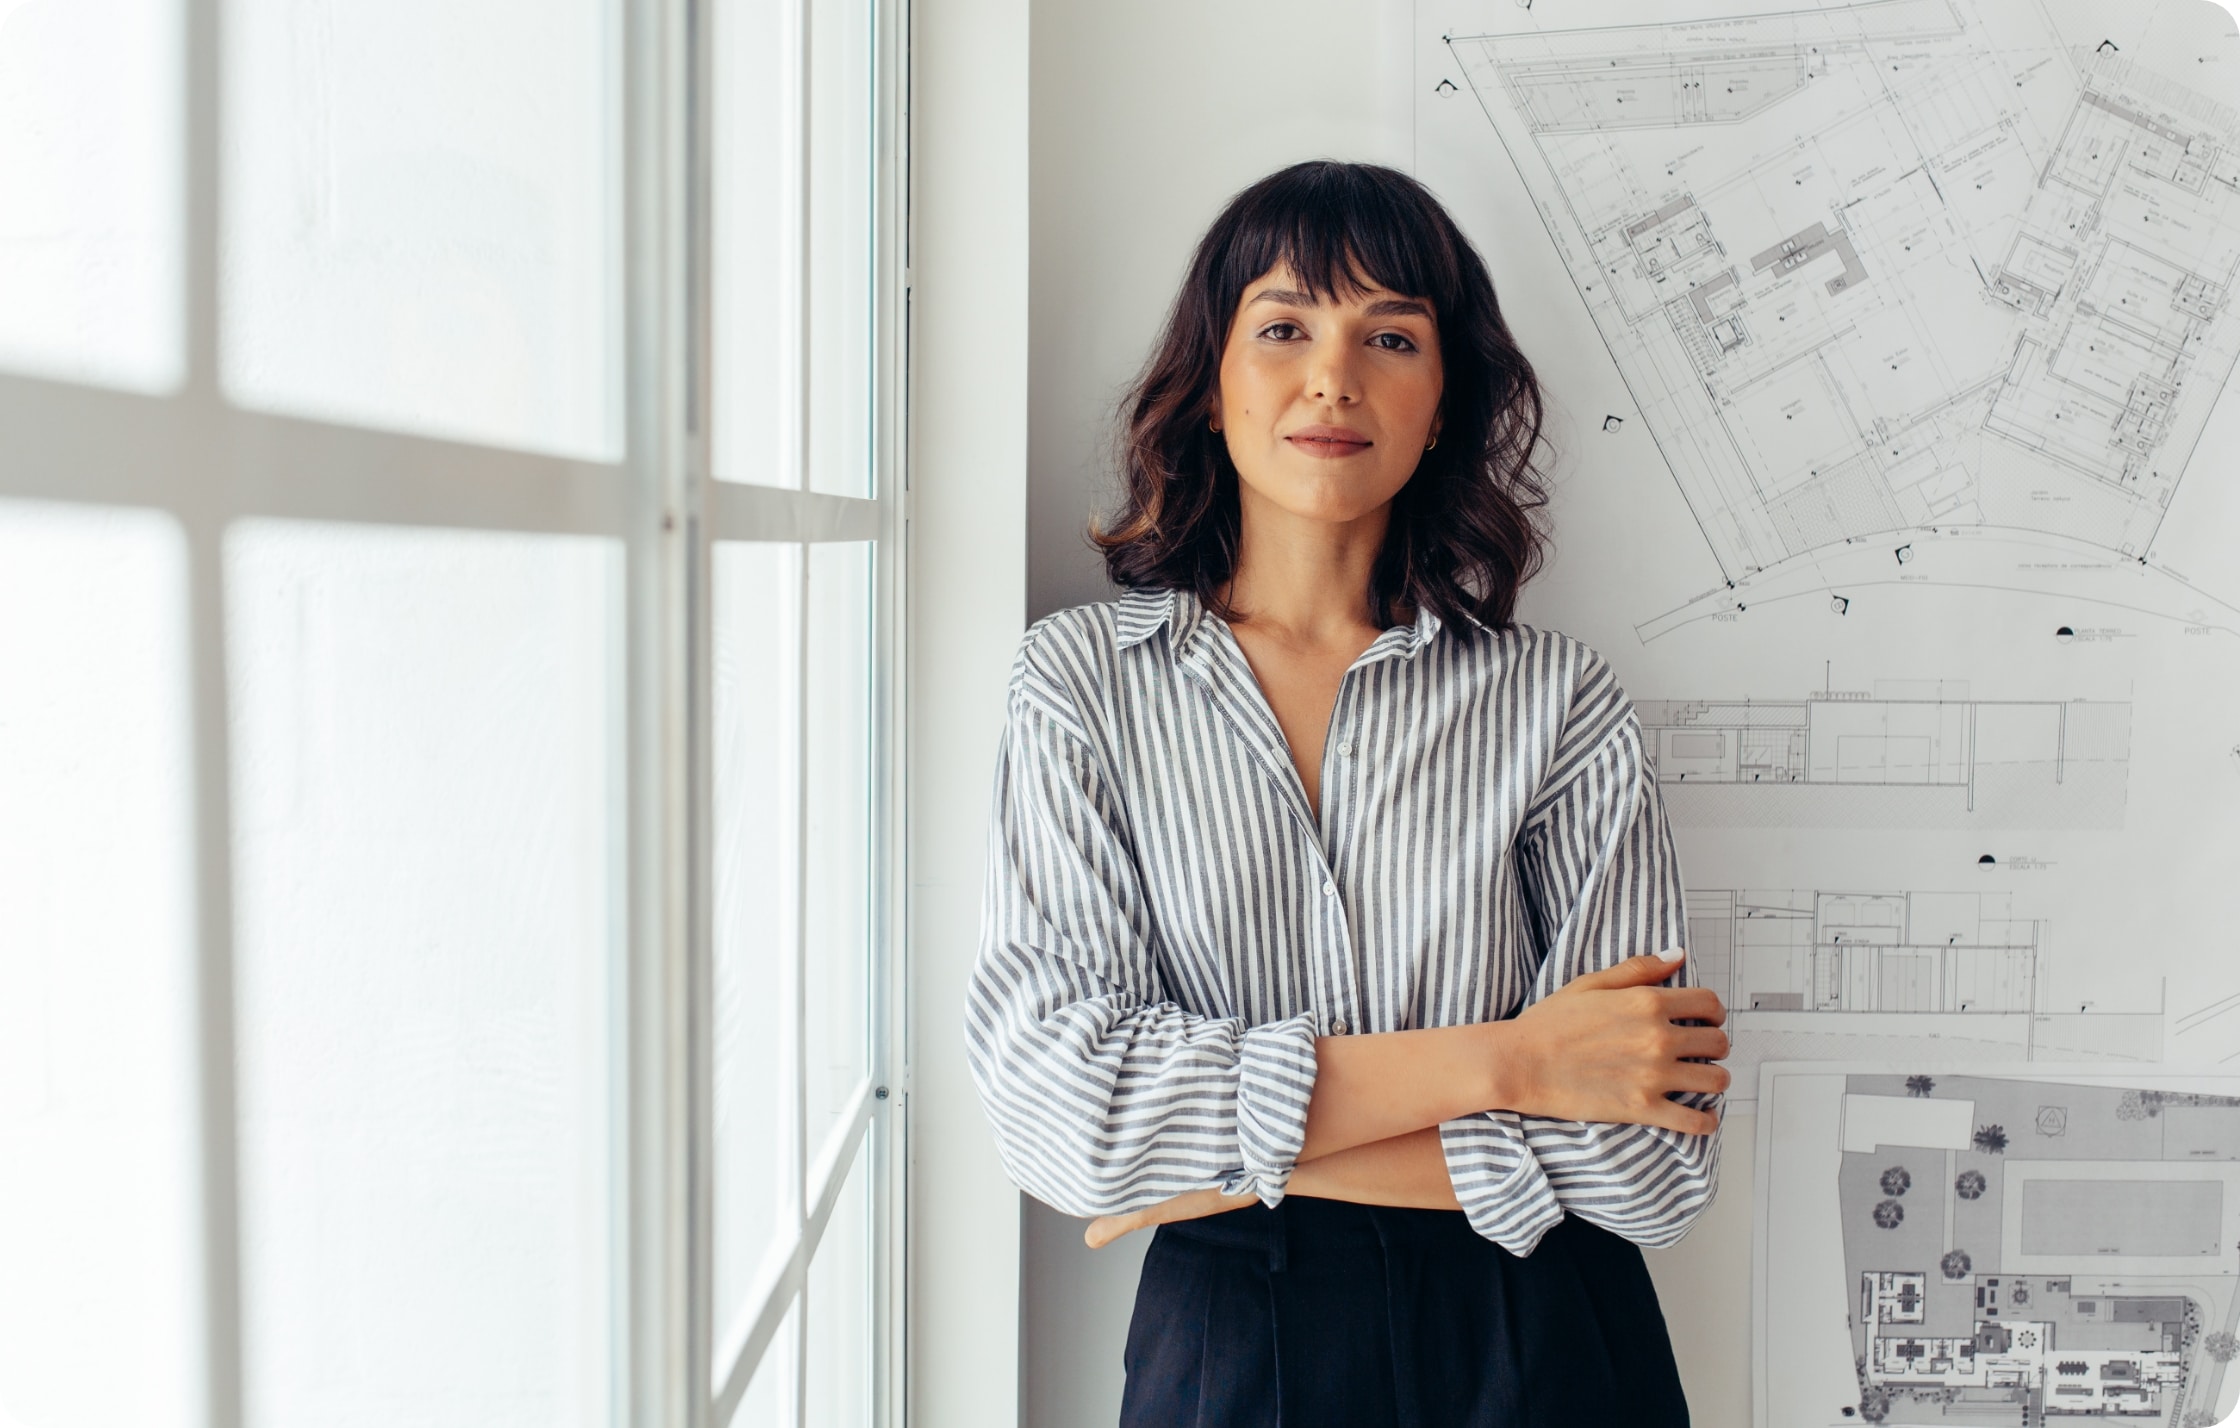 A woman architect leaning against wall of designs